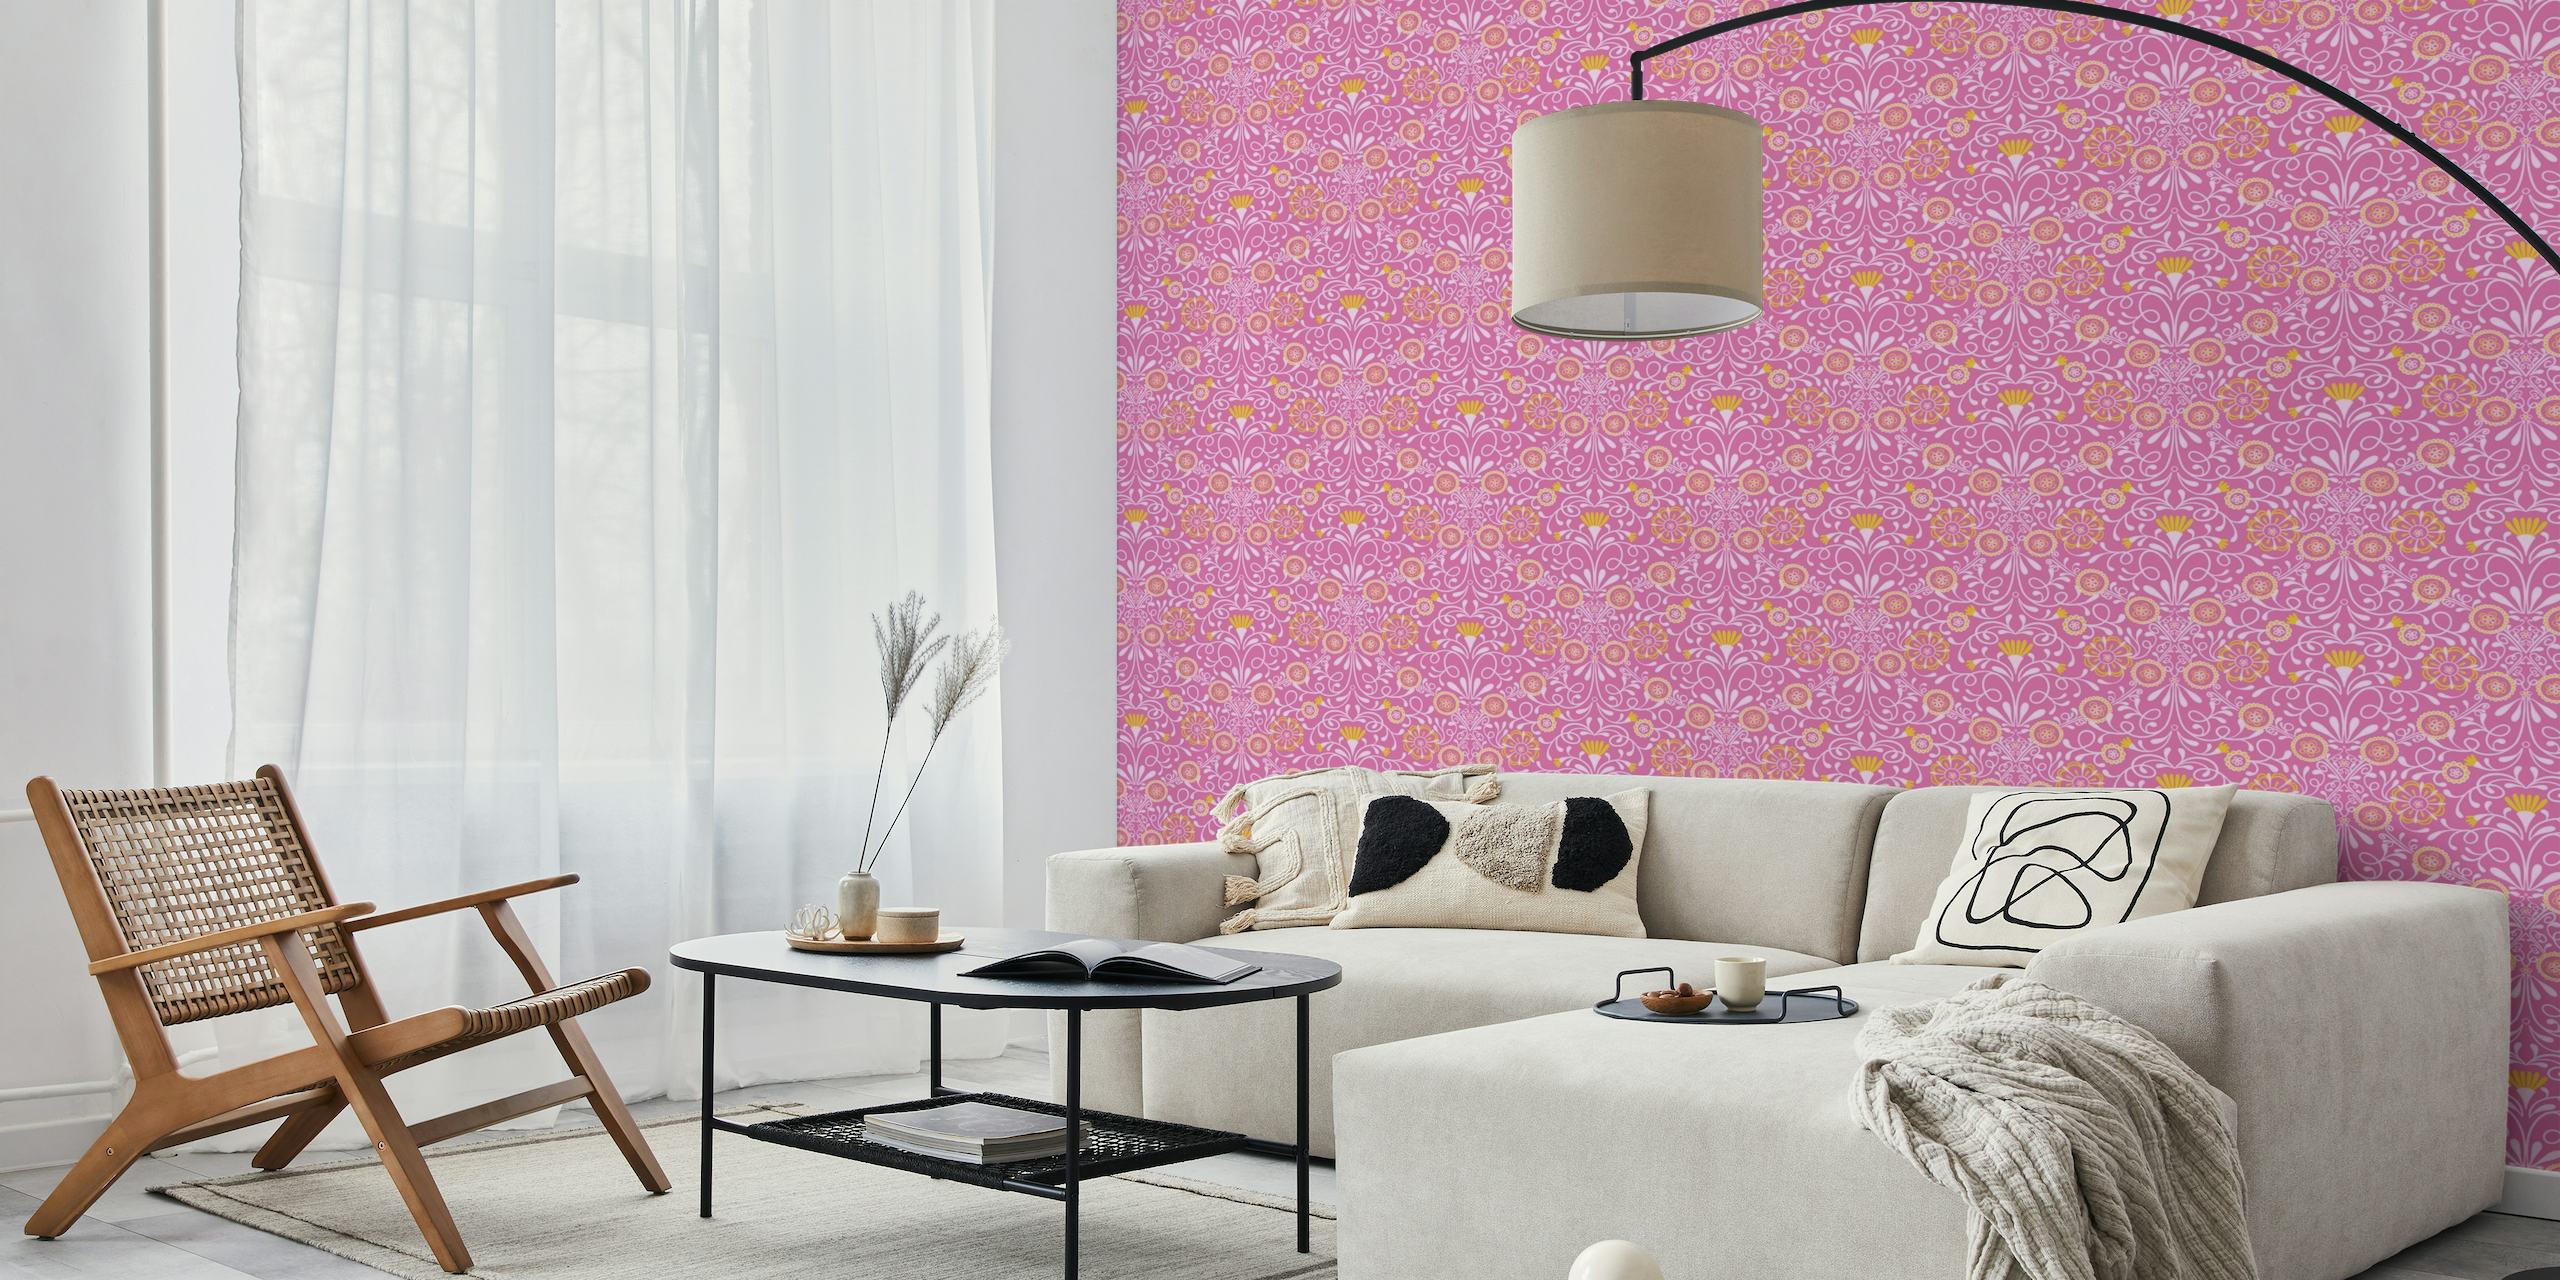 Tuscan Tile in Pink and Yellow papel pintado